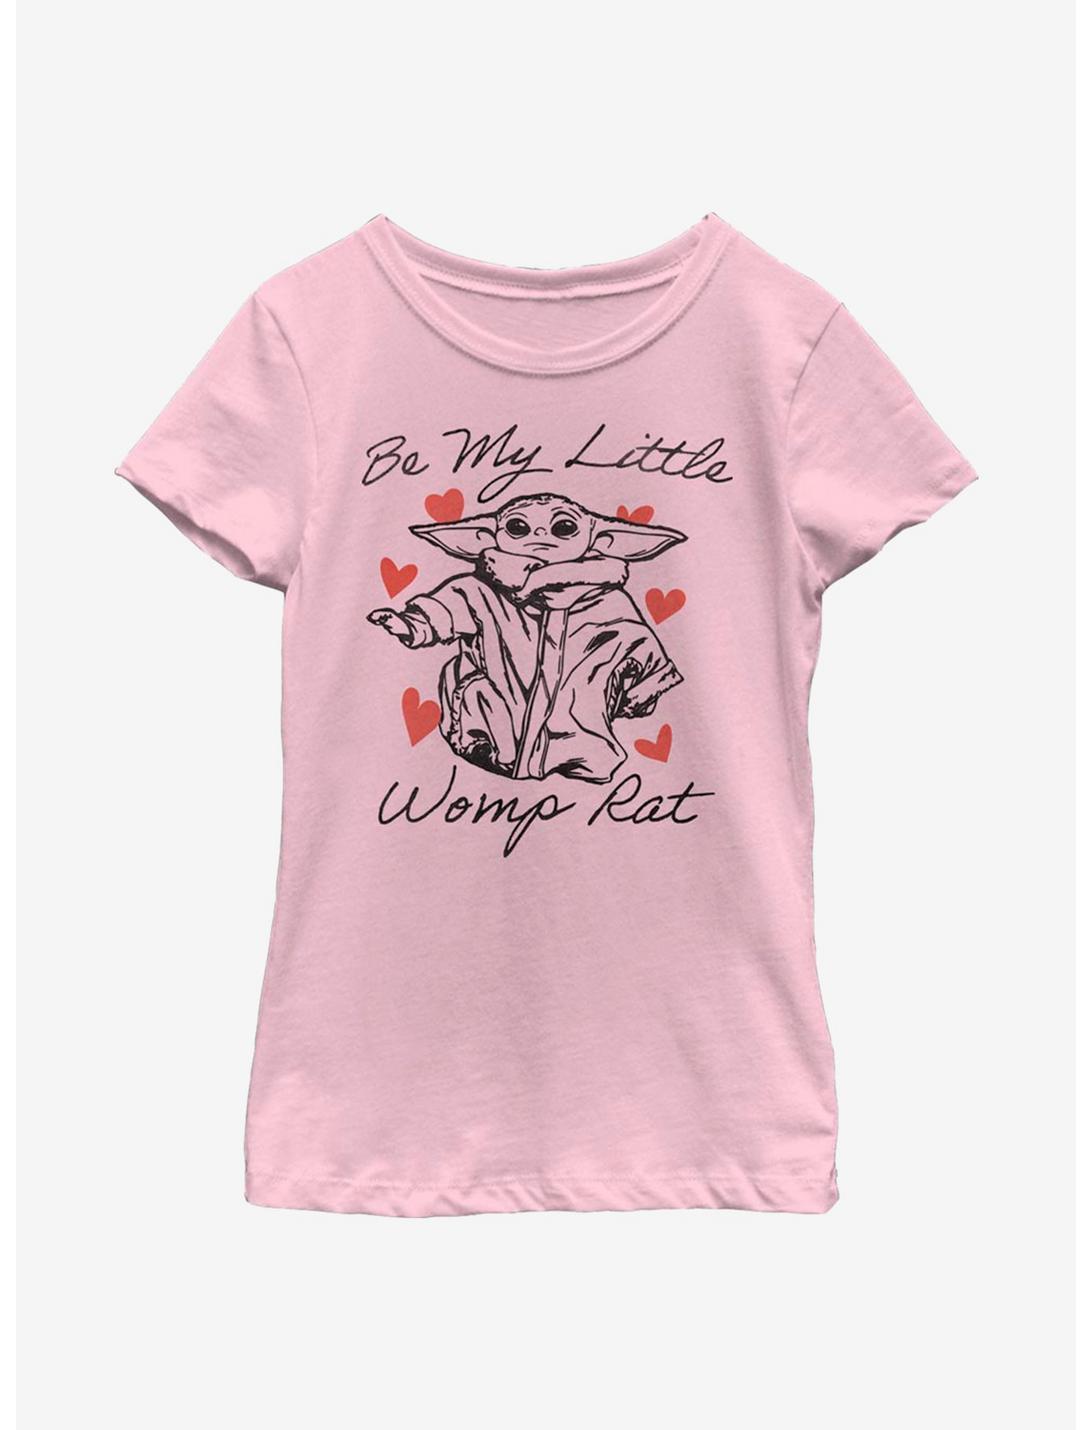 Star Wars The Mandalorian The Child Be My Womp Rat Youth Girls T-Shirt, PINK, hi-res